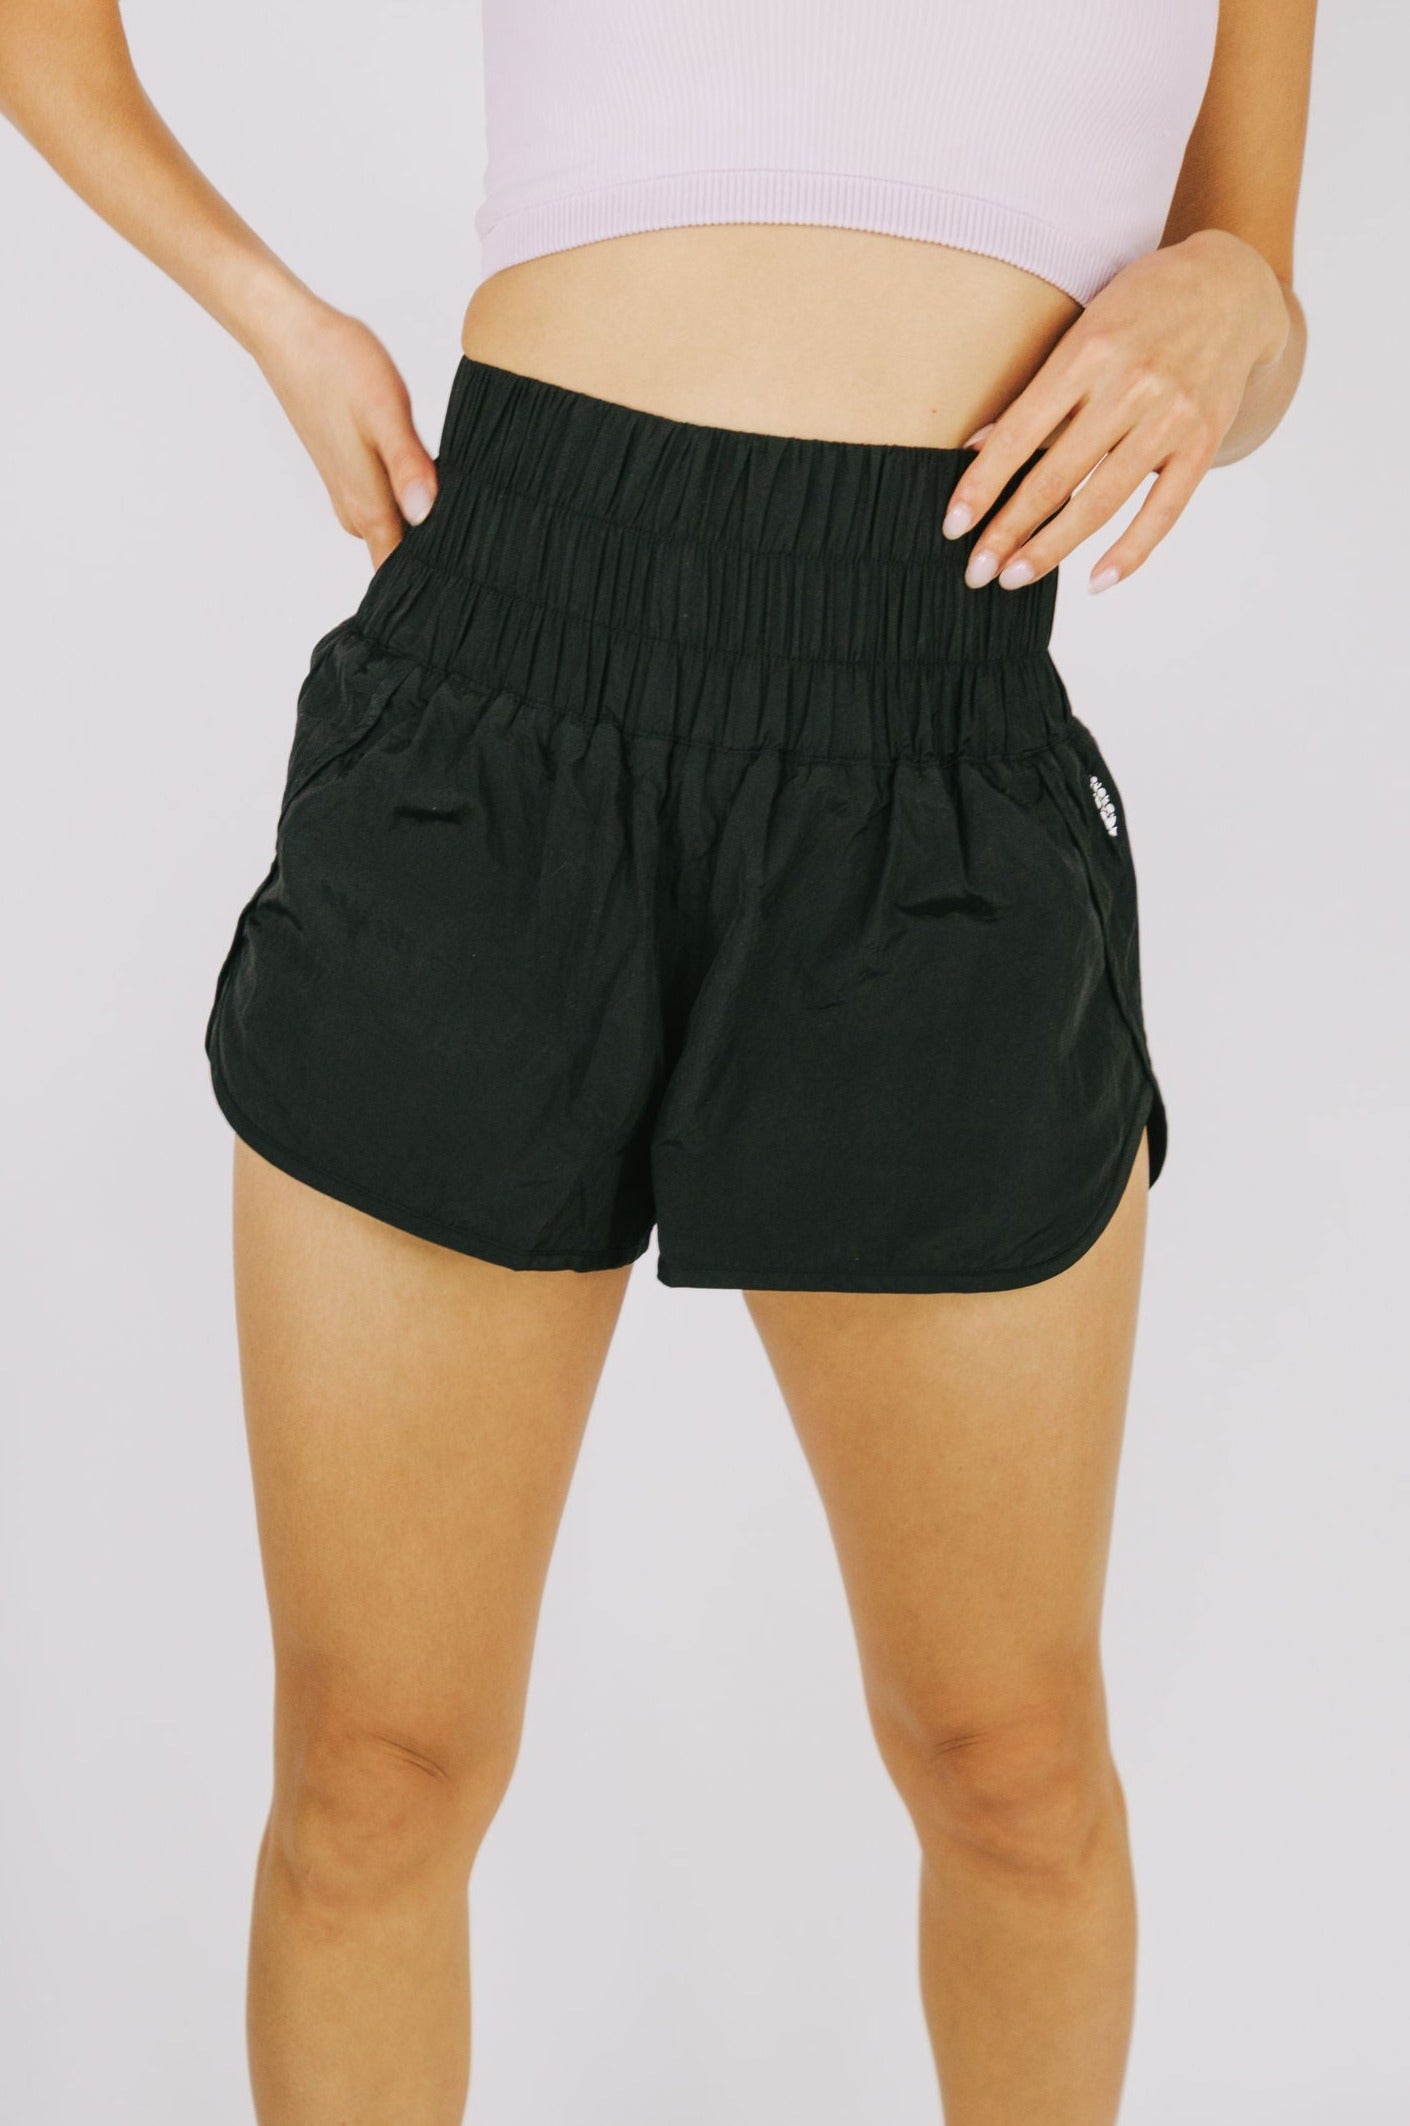 FREE PEOPLE - The Way Home Short - 5 Colors!